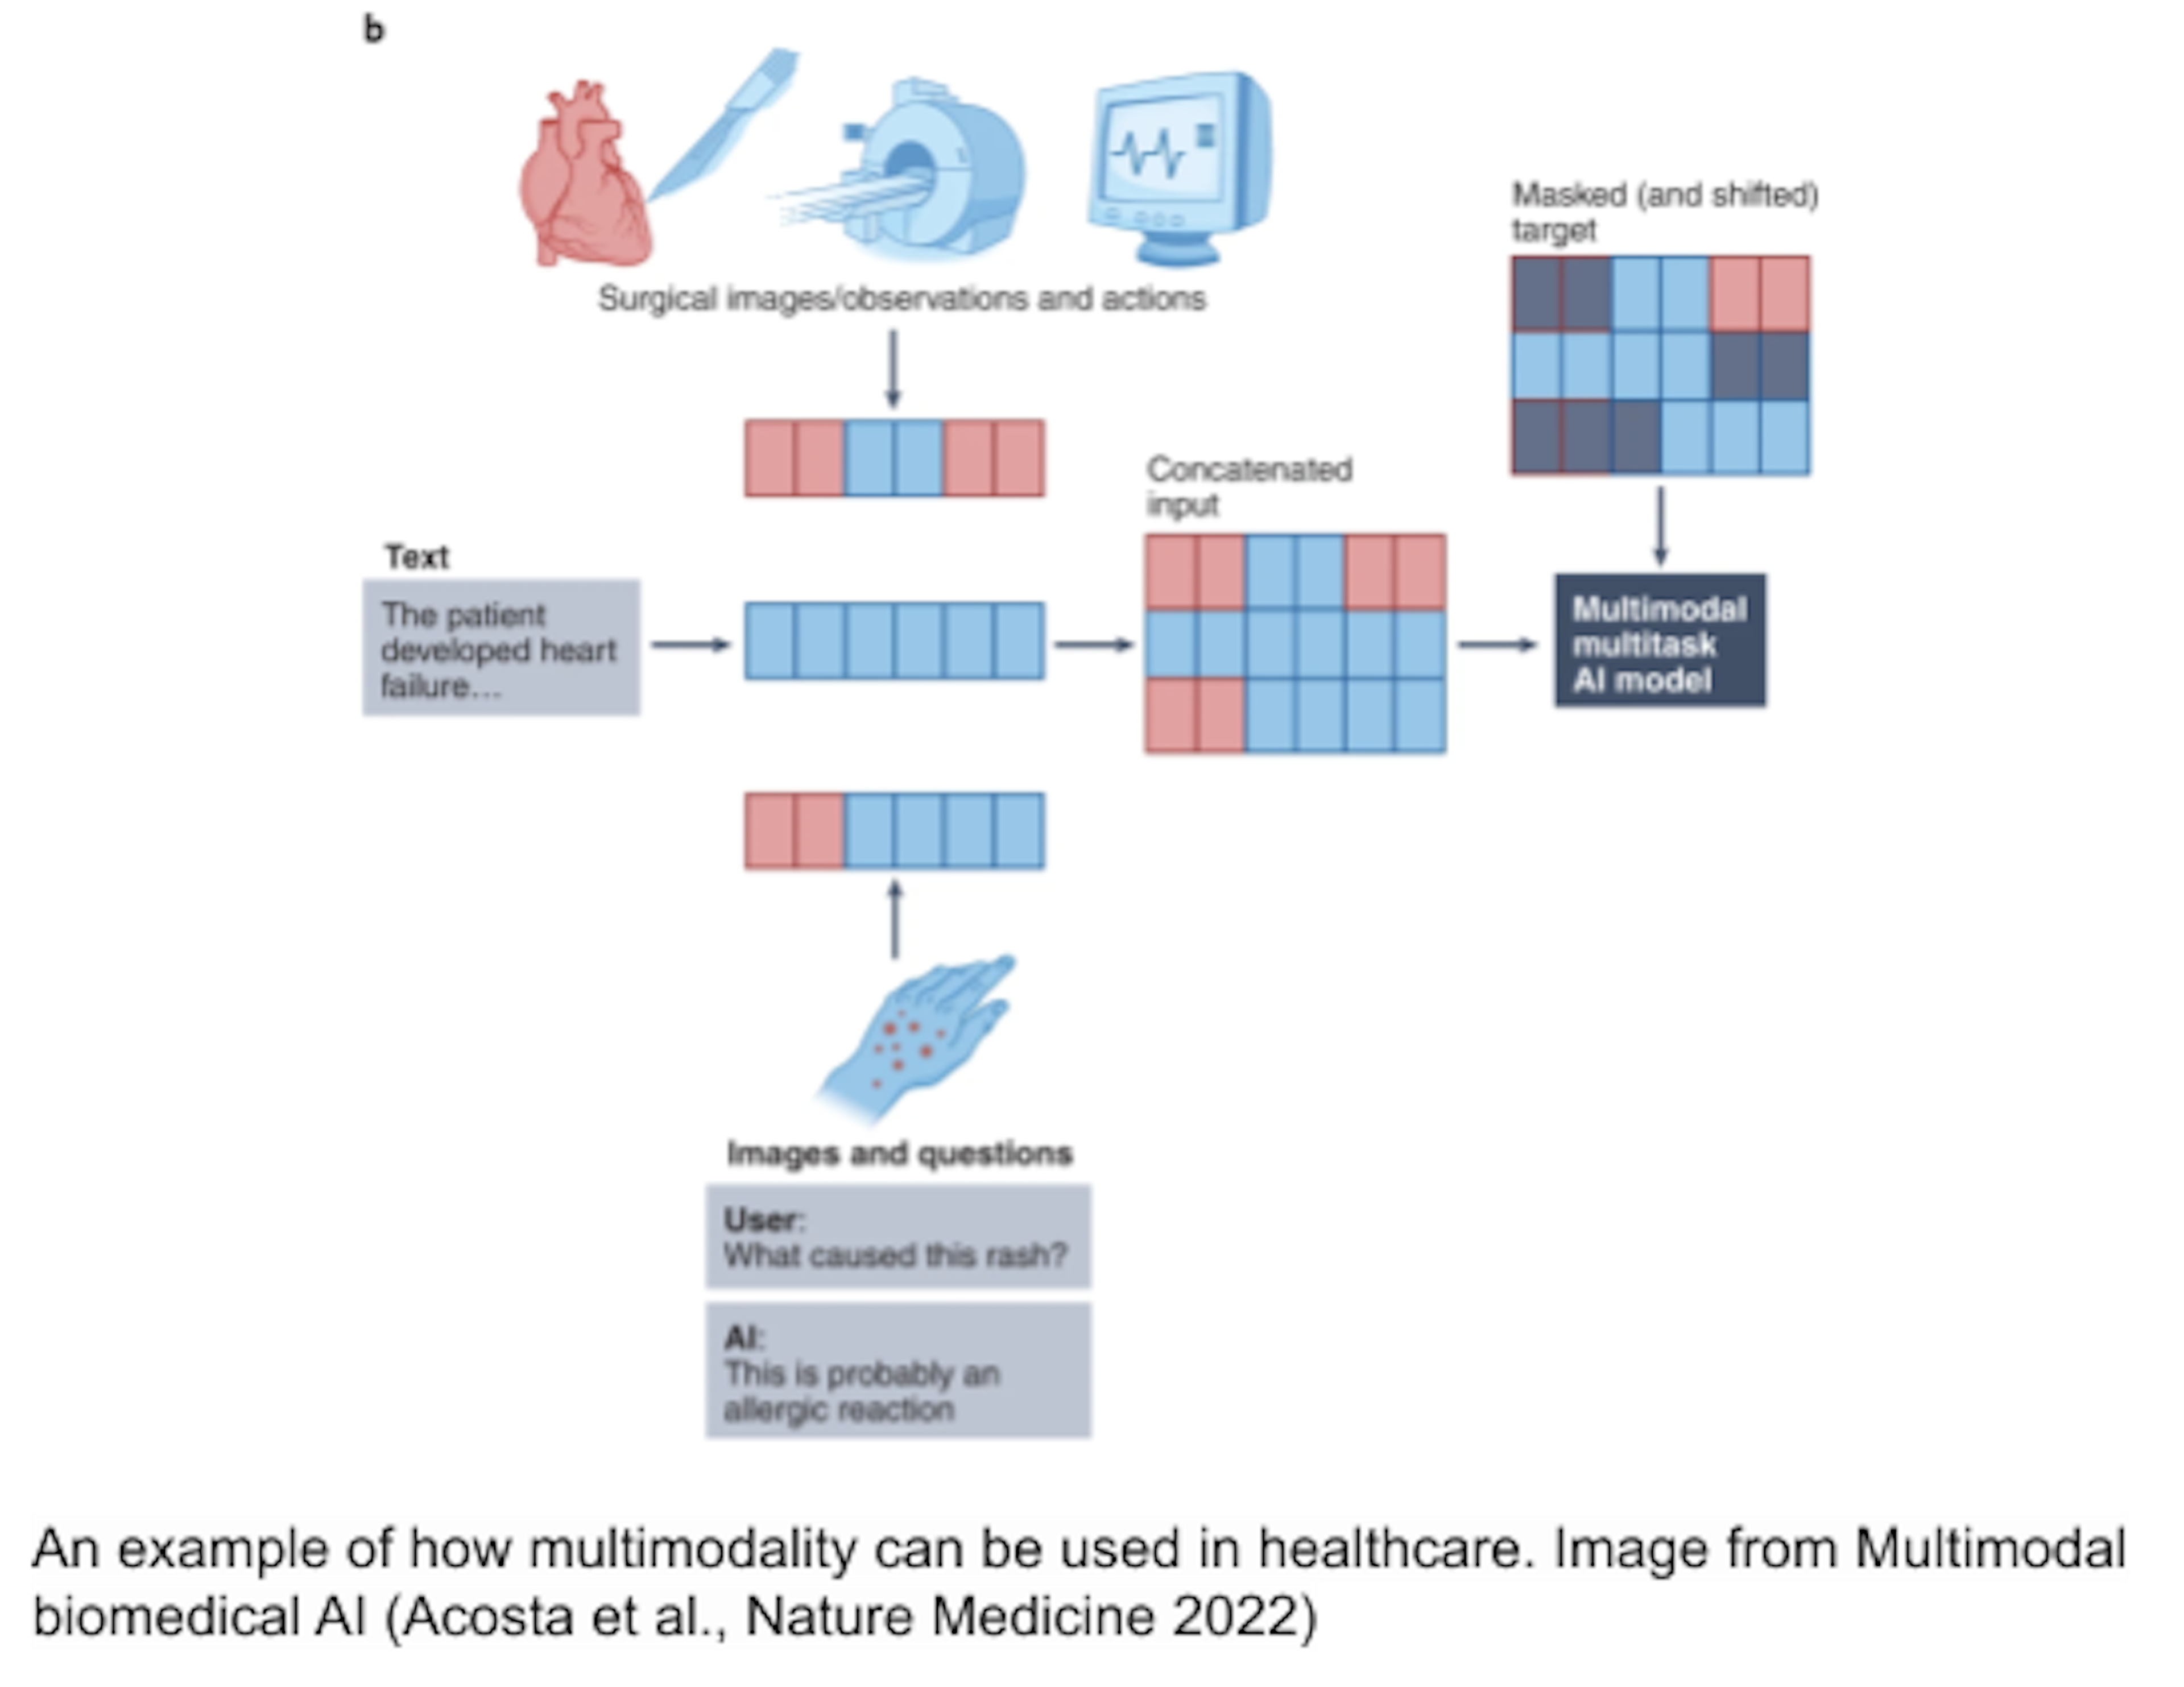 An example of how multimodality can be used in healthcare. Image from Multimodal biomedical AI (Acosta et al., Nature Medicine 2022)